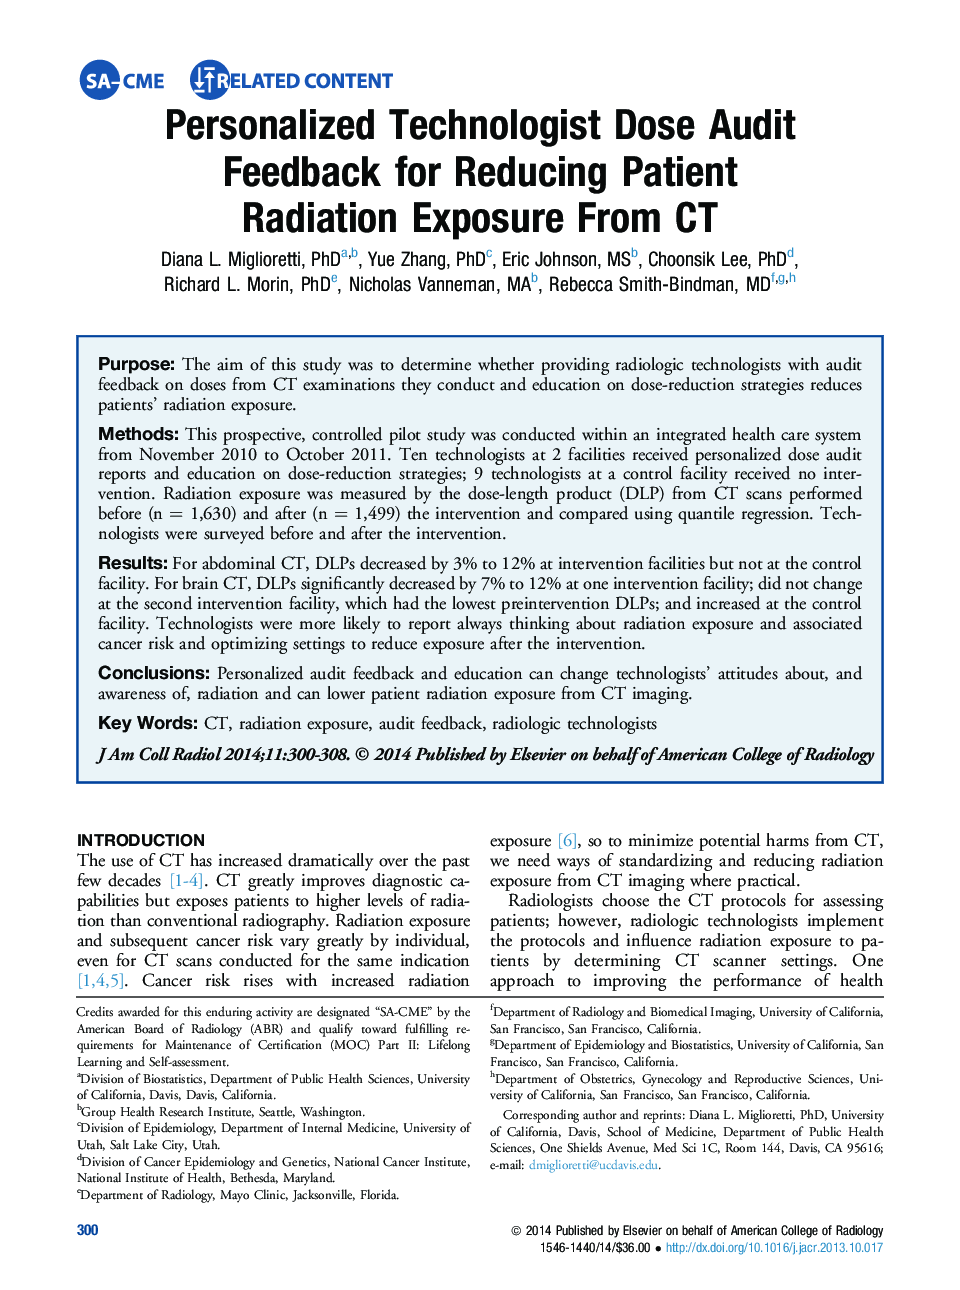 Personalized Technologist Dose Audit Feedback for Reducing Patient Radiation Exposure From CT